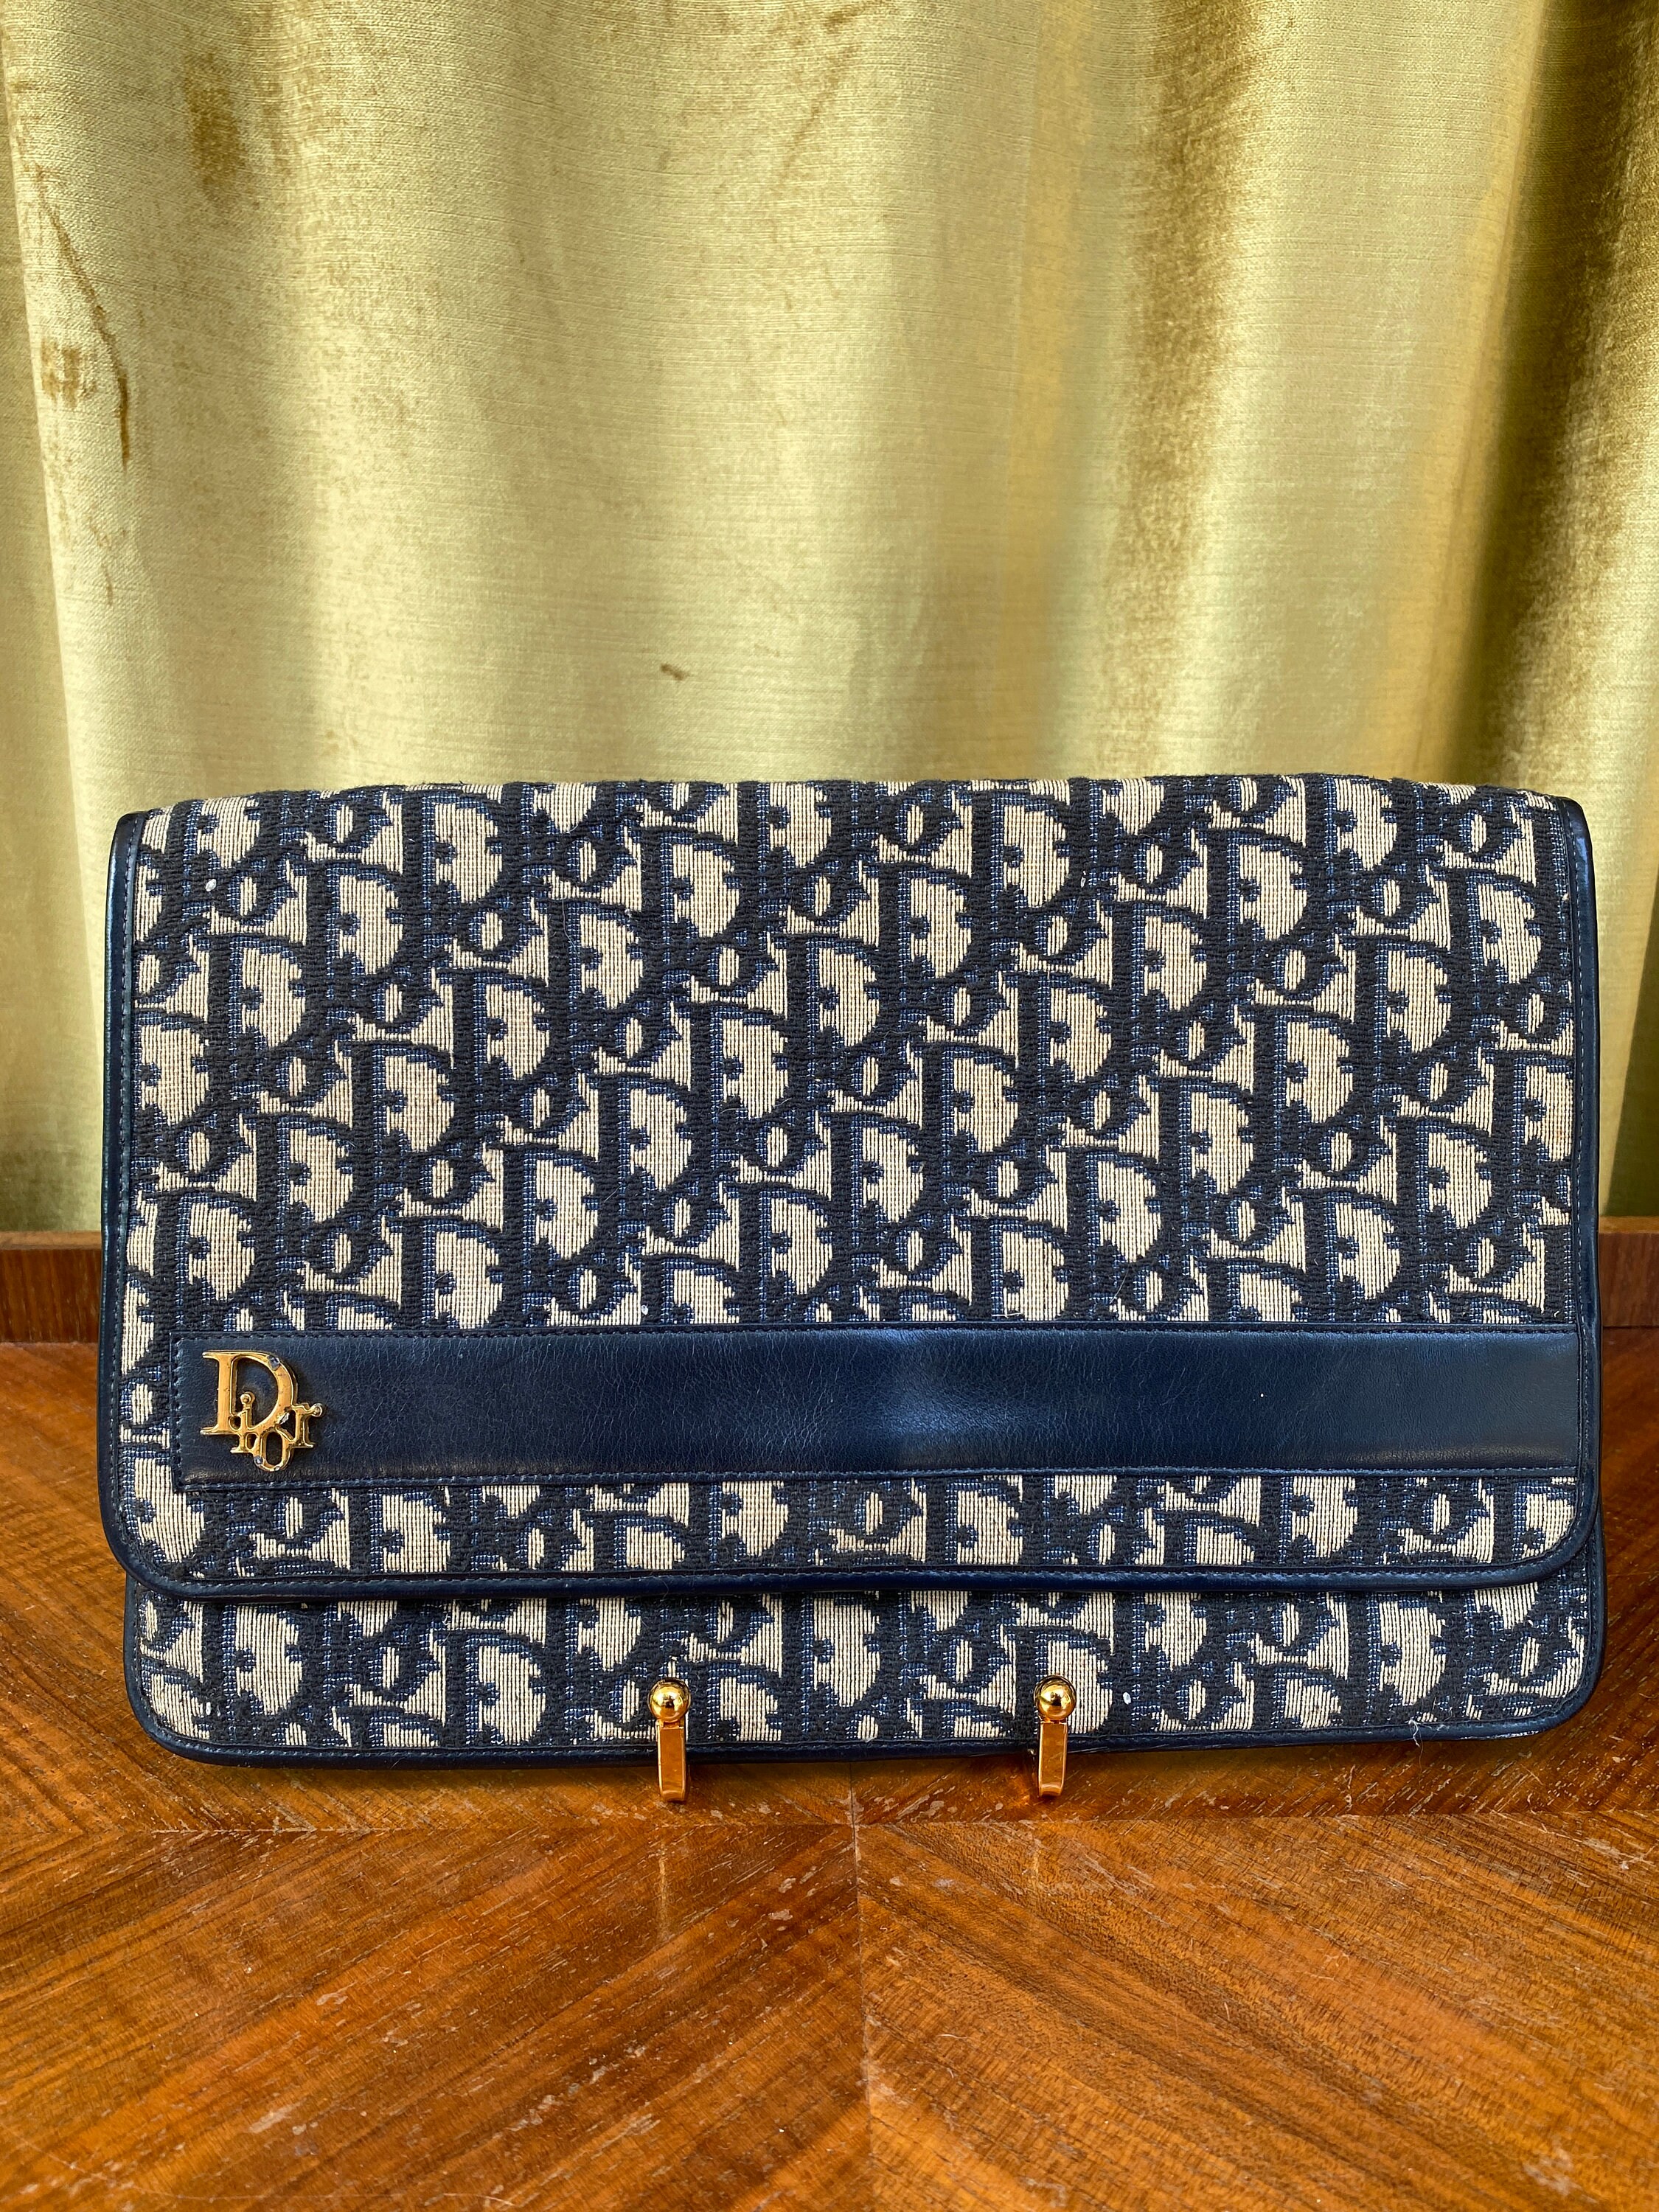 30 Montaigne Small bag in blue leather Dior - Second Hand / Used